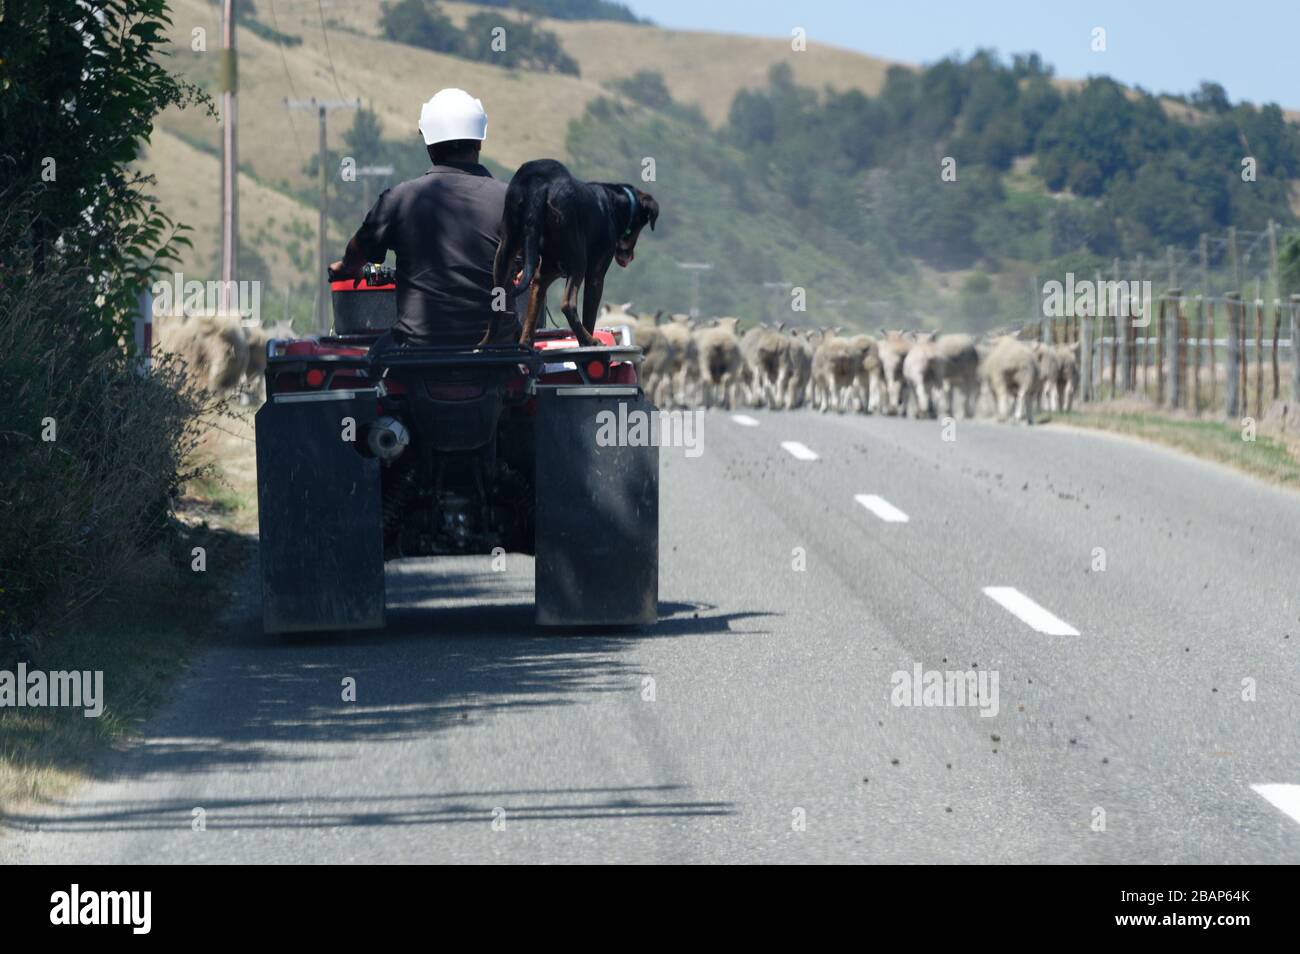 A quad bike is used to drive sheep along a rural New Zealand road, the sheep dog is riding on the back Stock Photo